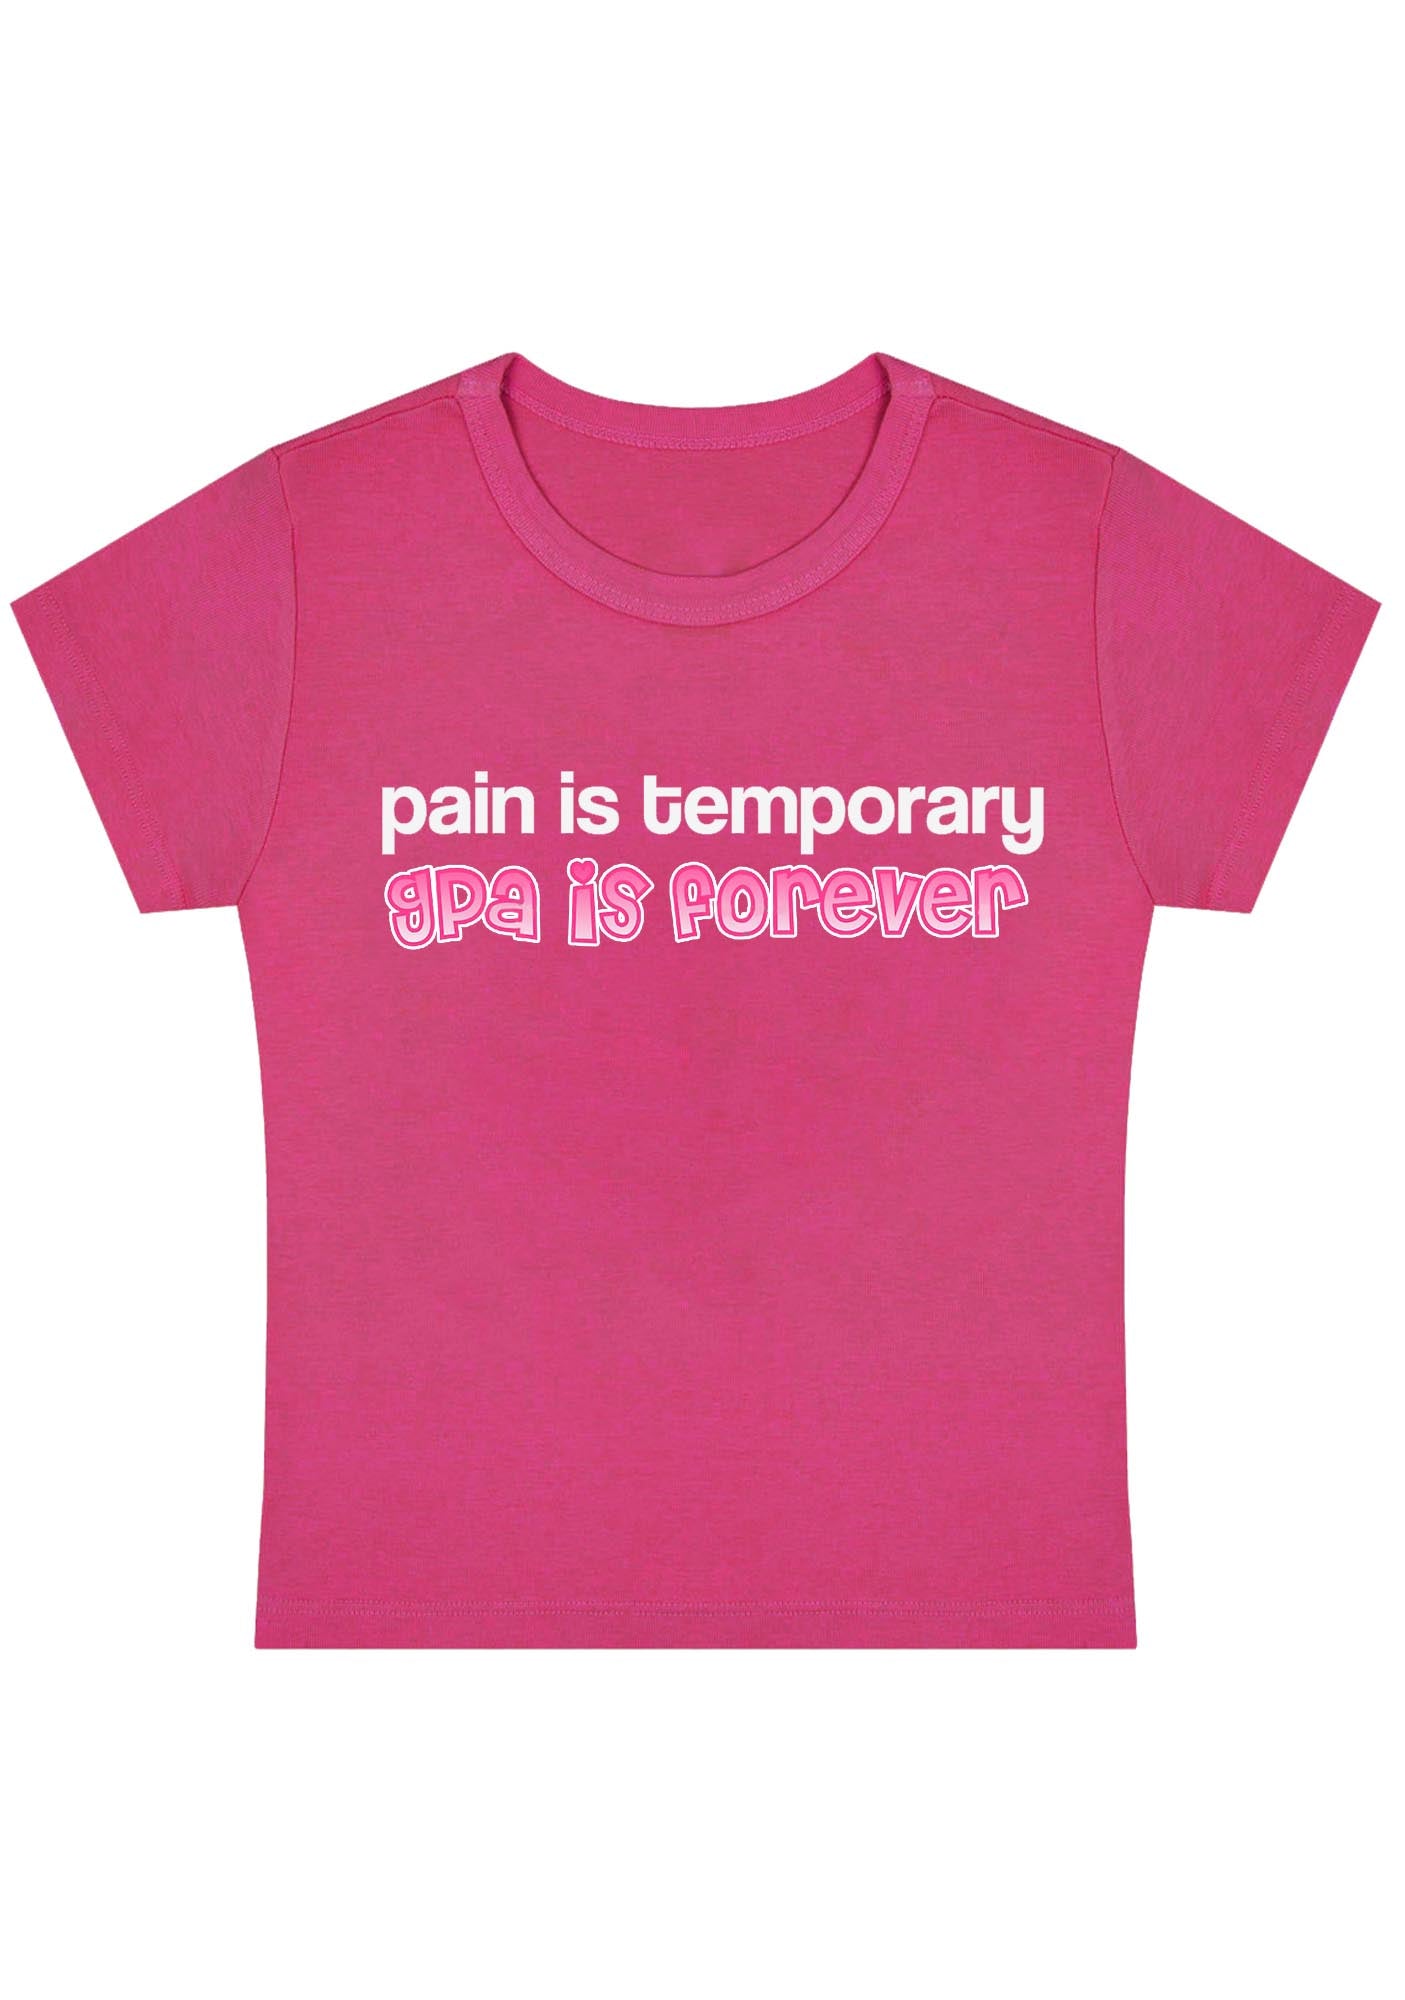 Pain Is Temporary GPA Is Forever Y2K Baby Tee